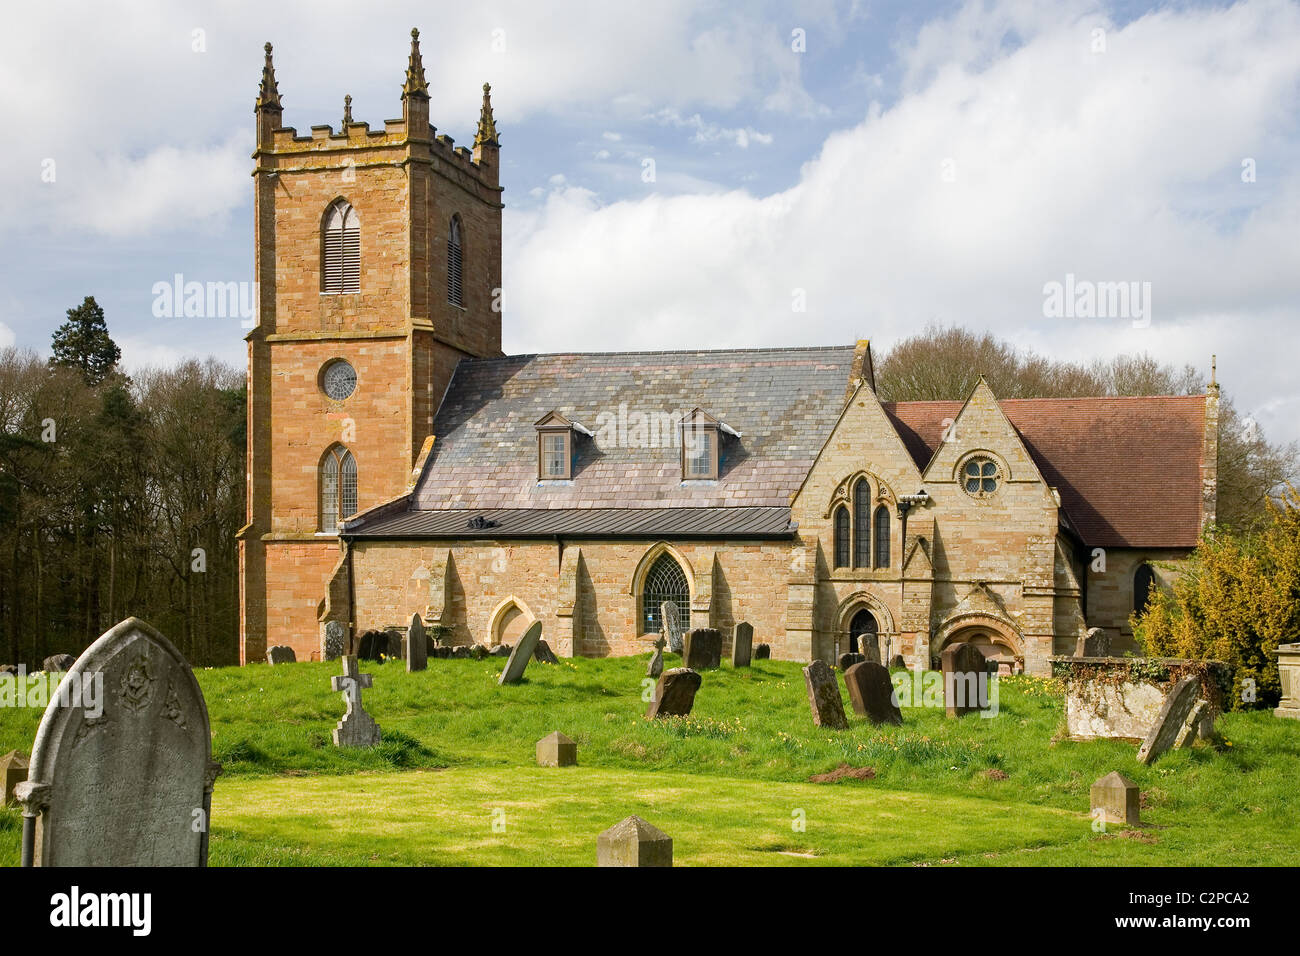 The Church of St Mary the Virgin, Hanbury, Worcestershire Stock Photo